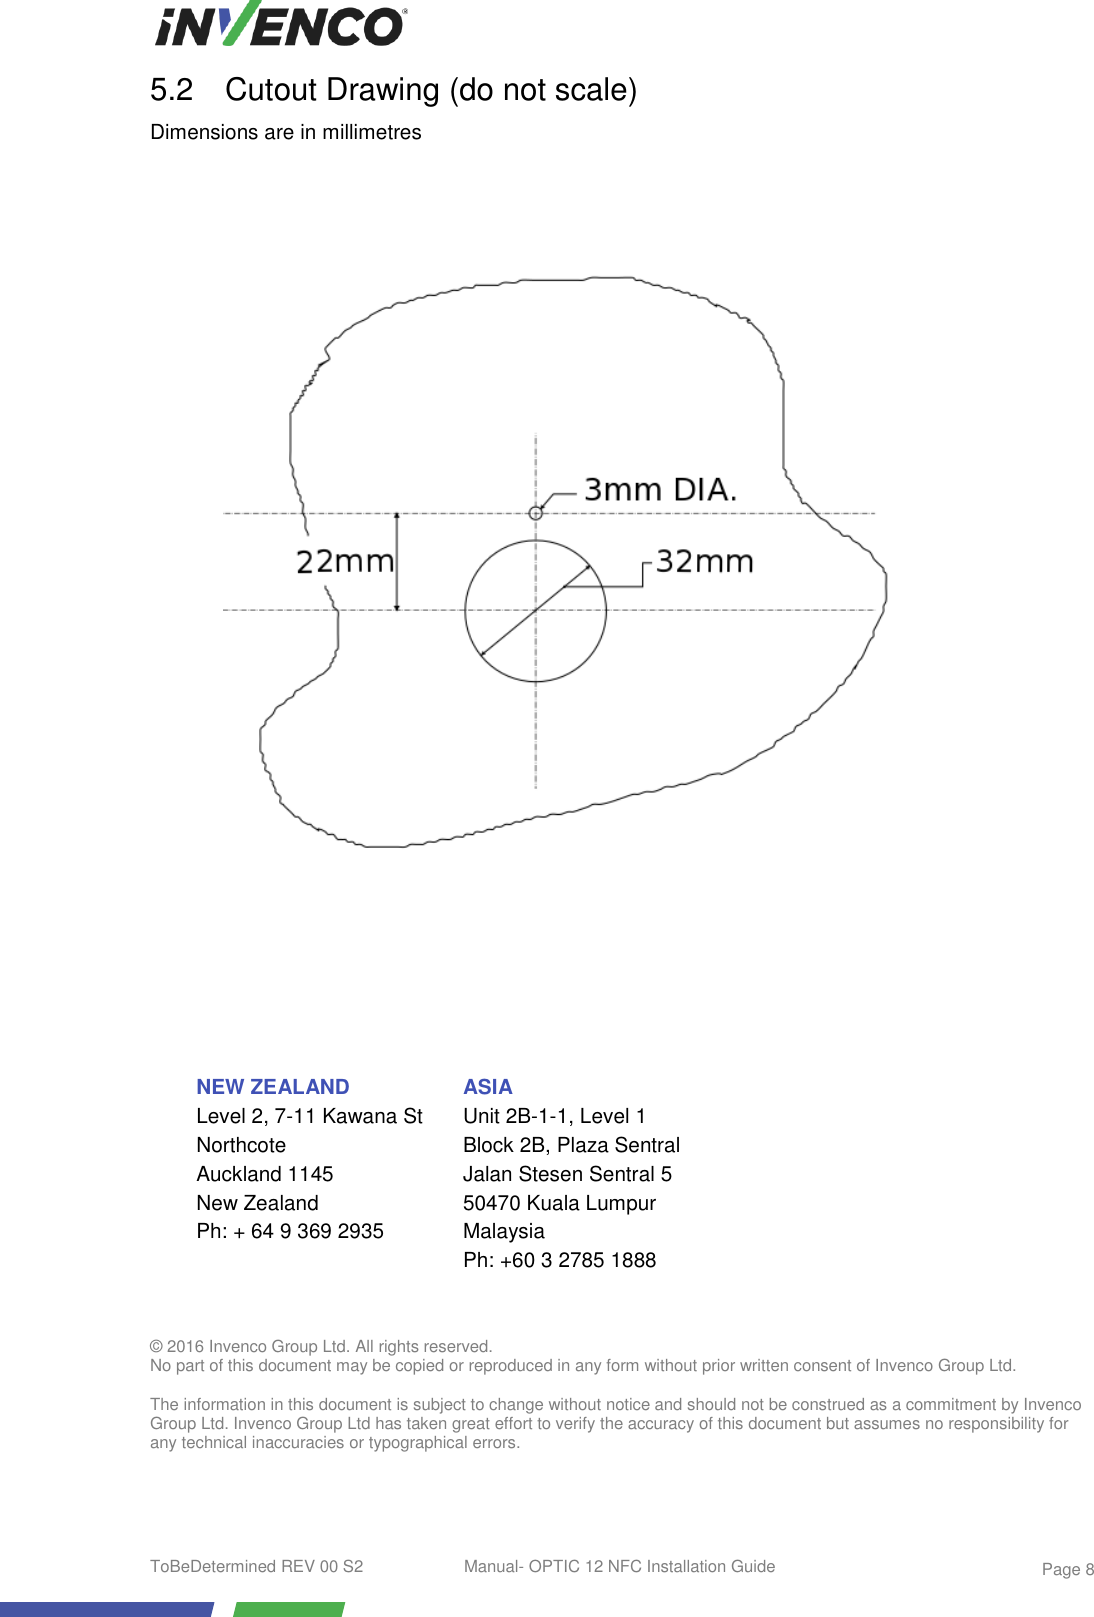  ToBeDetermined REV 00 S2  Manual- OPTIC 12 NFC Installation Guide    Page 8 5.2  Cutout Drawing (do not scale) Dimensions are in millimetres                                                               © 2016 Invenco Group Ltd. All rights reserved. No part of this document may be copied or reproduced in any form without prior written consent of Invenco Group Ltd.  The information in this document is subject to change without notice and should not be construed as a commitment by Invenco Group Ltd. Invenco Group Ltd has taken great effort to verify the accuracy of this document but assumes no responsibility for any technical inaccuracies or typographical errors.  NEW ZEALAND Level 2, 7-11 Kawana St Northcote Auckland 1145  New Zealand Ph: + 64 9 369 2935  ASIA Unit 2B-1-1, Level 1 Block 2B, Plaza Sentral Jalan Stesen Sentral 5 50470 Kuala Lumpur Malaysia Ph: +60 3 2785 1888   